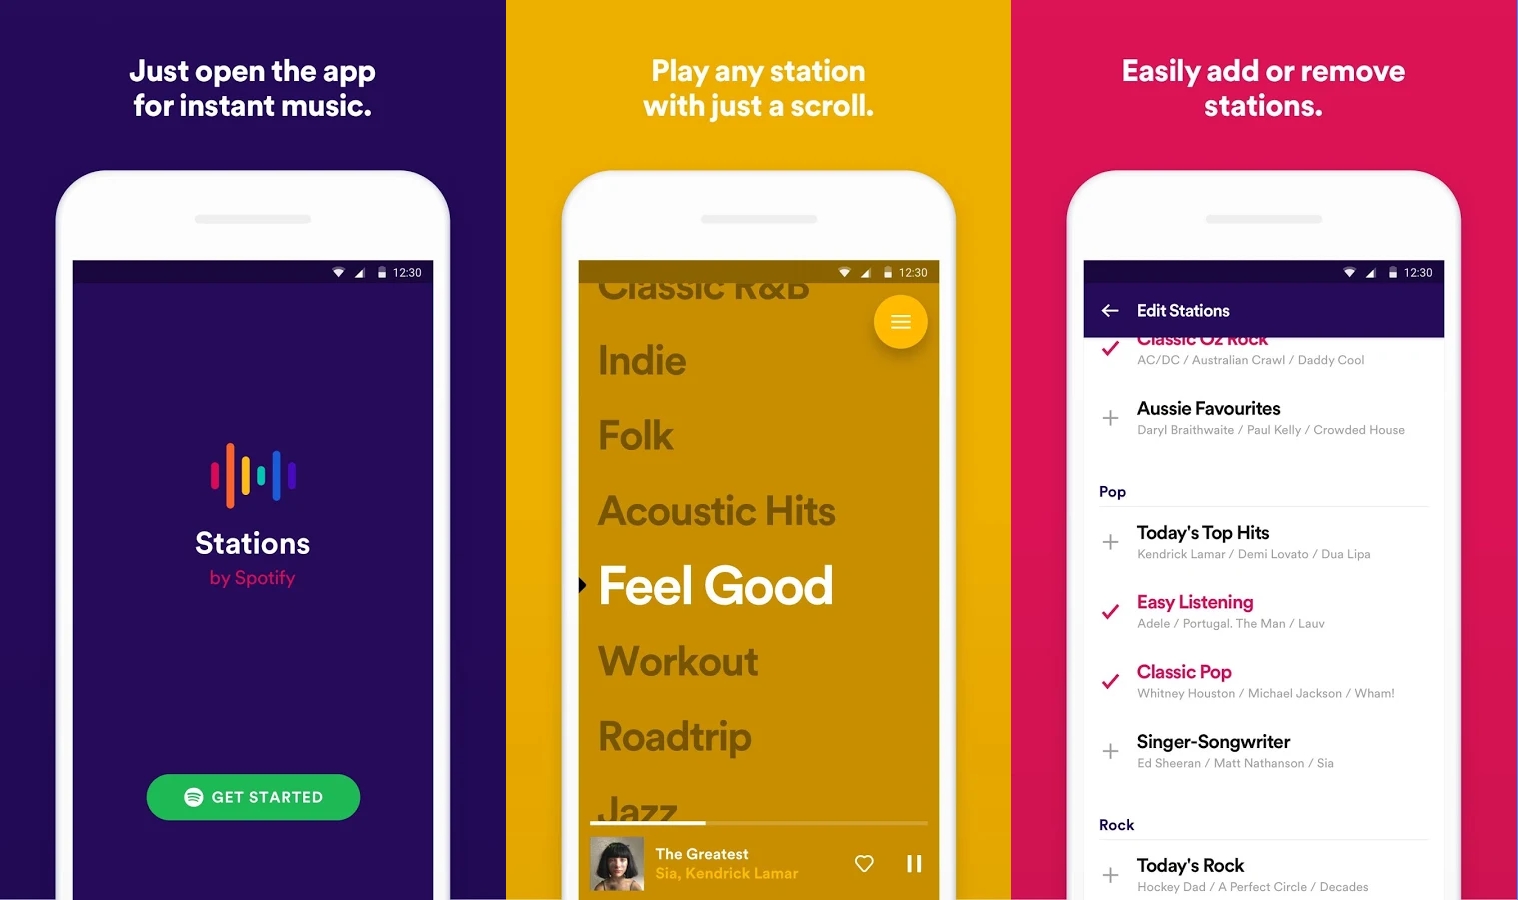 Spotify have a new app Stations that’s all about playlists